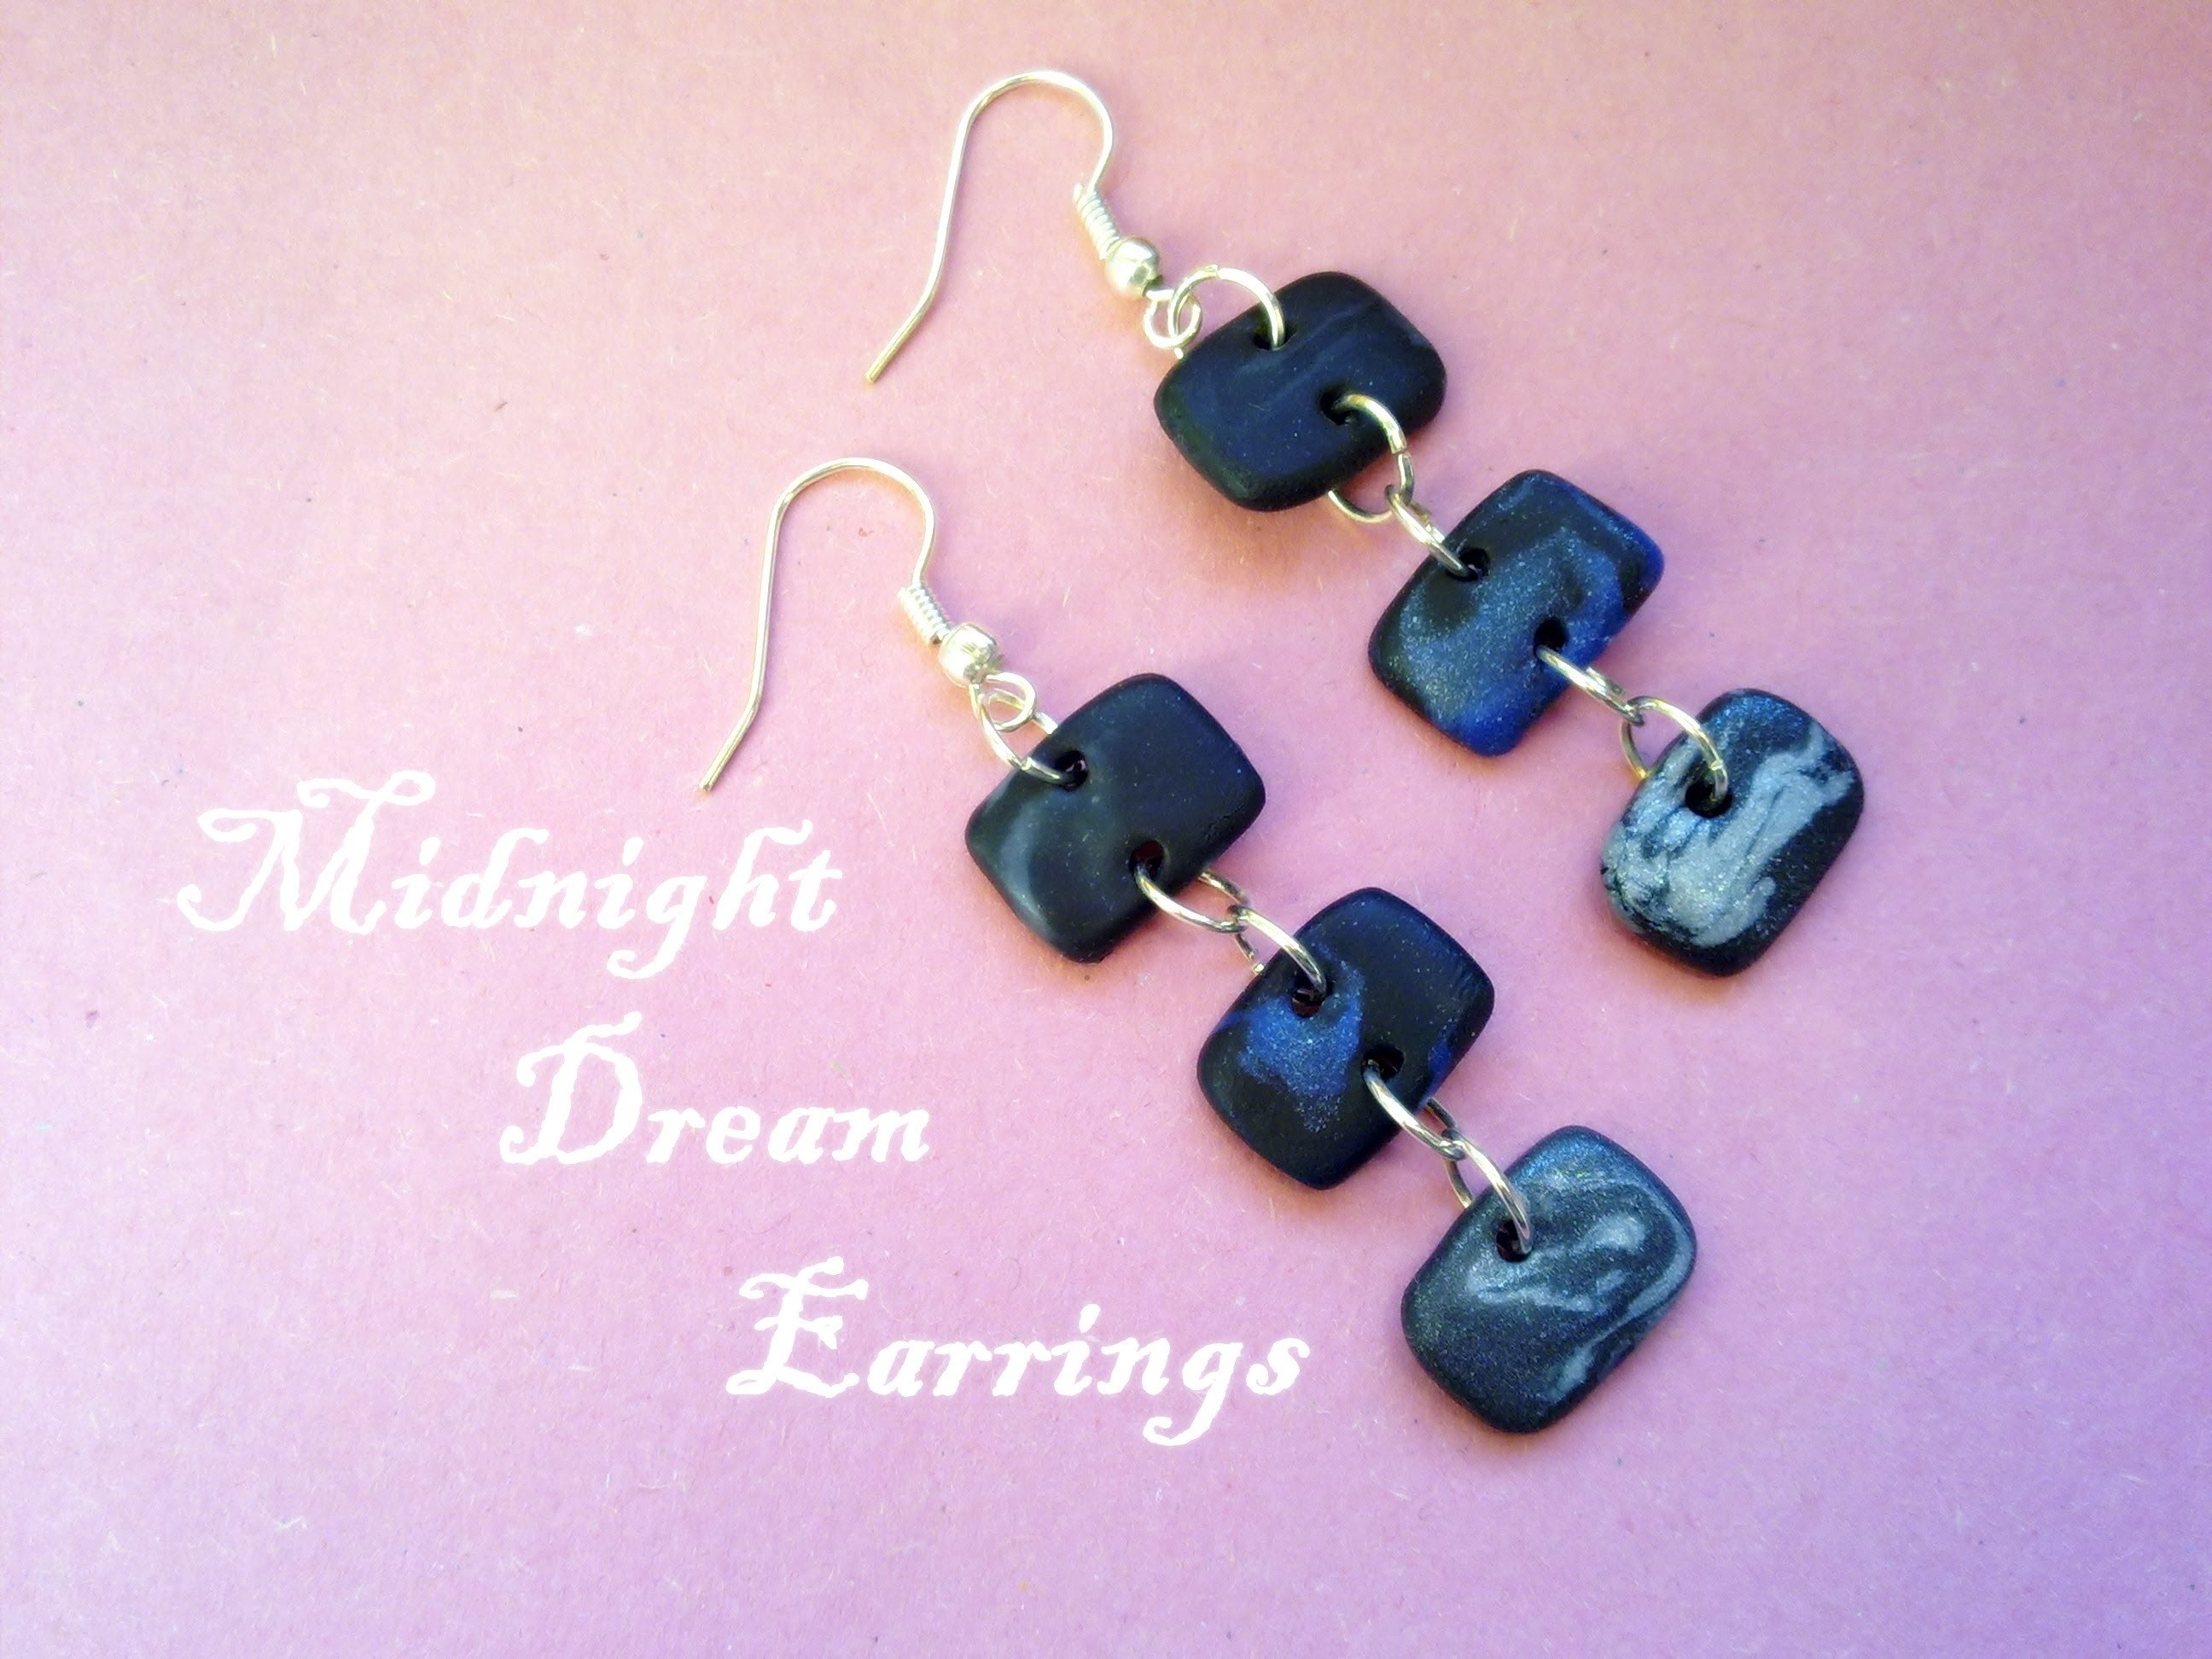 "Fast and Easy" # 3 - Midnight Dream Earrings (Polymer Clay Tutorial)